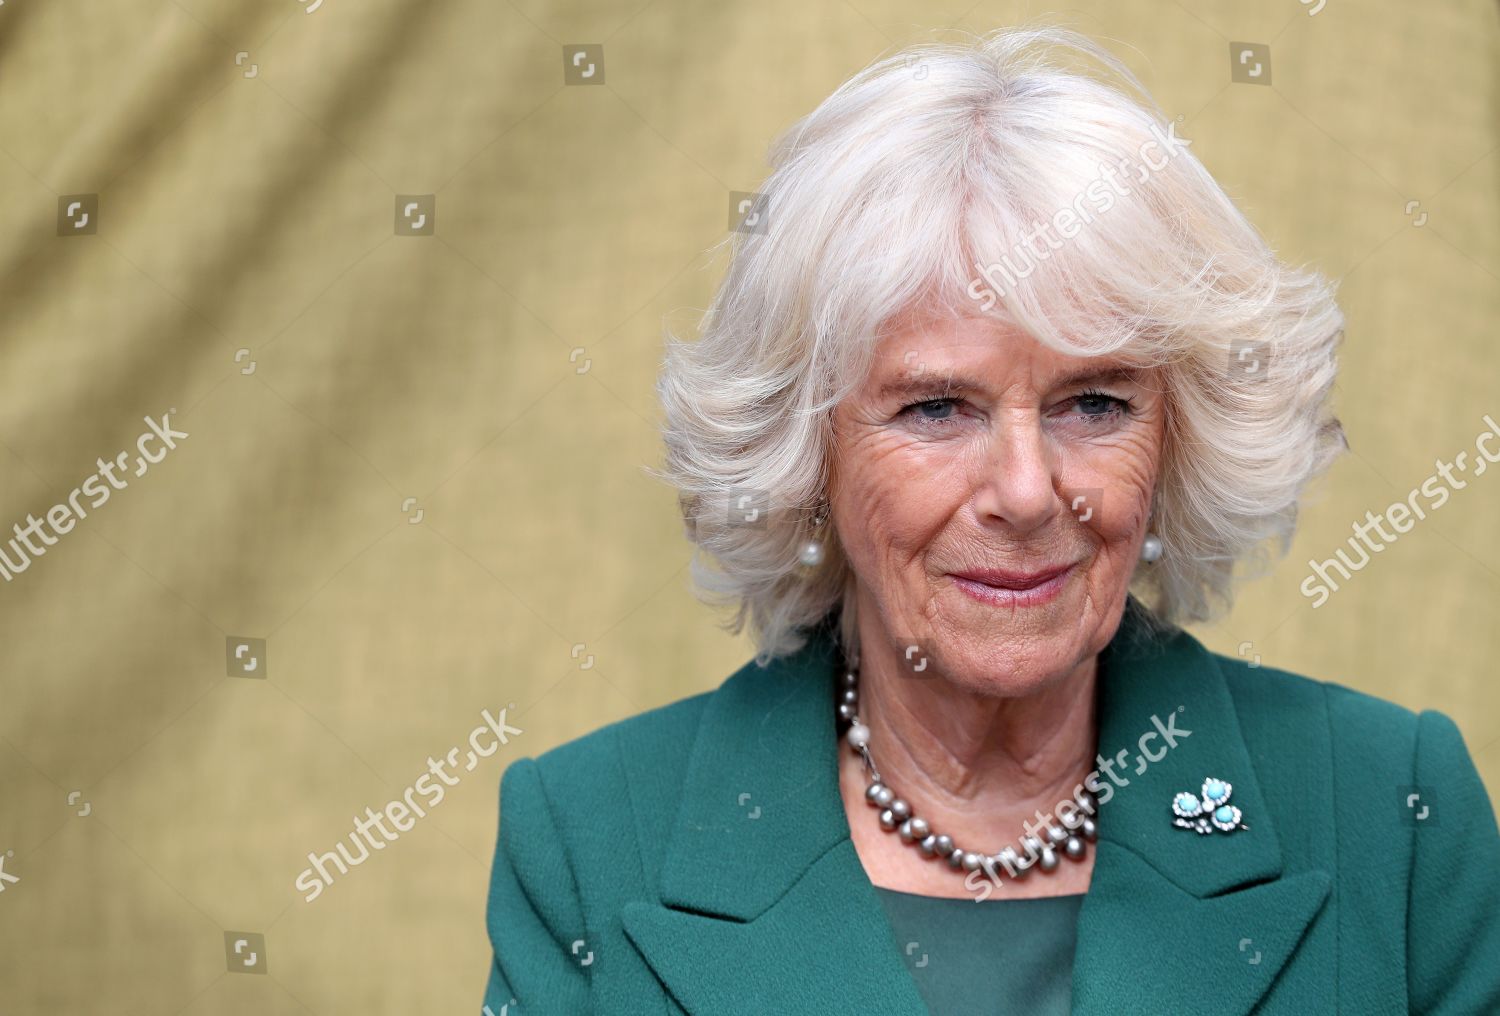 prince-charles-and-camilla-duchess-of-cornwall-visit-to-northern-ireland-uk-shutterstock-editorial-10195448r.jpg